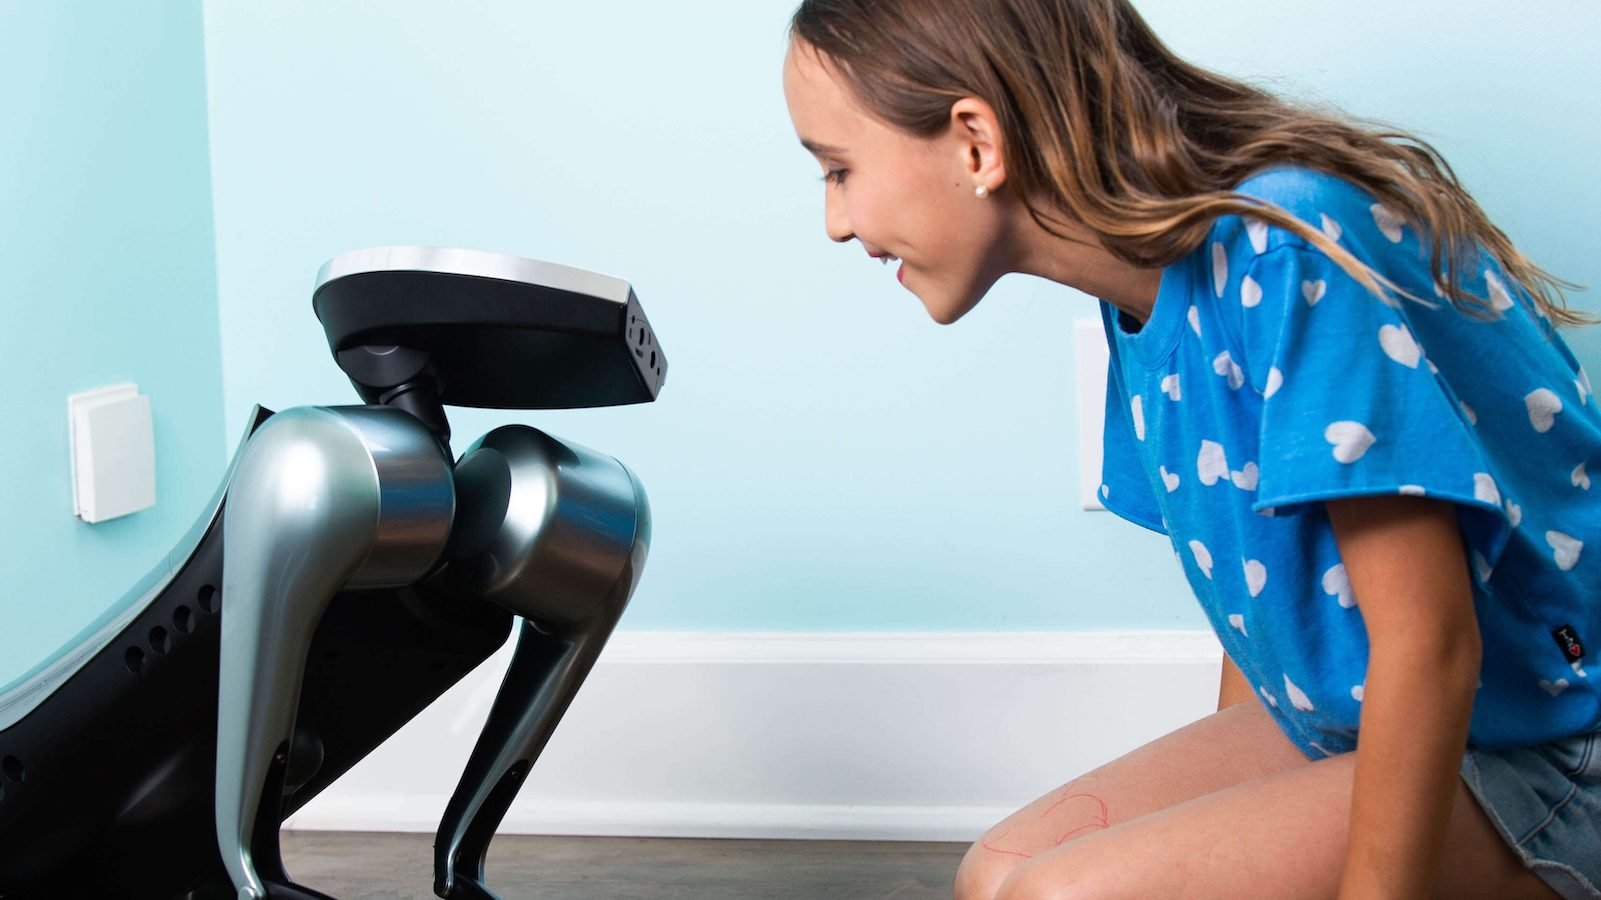 KODA AI robot dog interacts socially with its owners